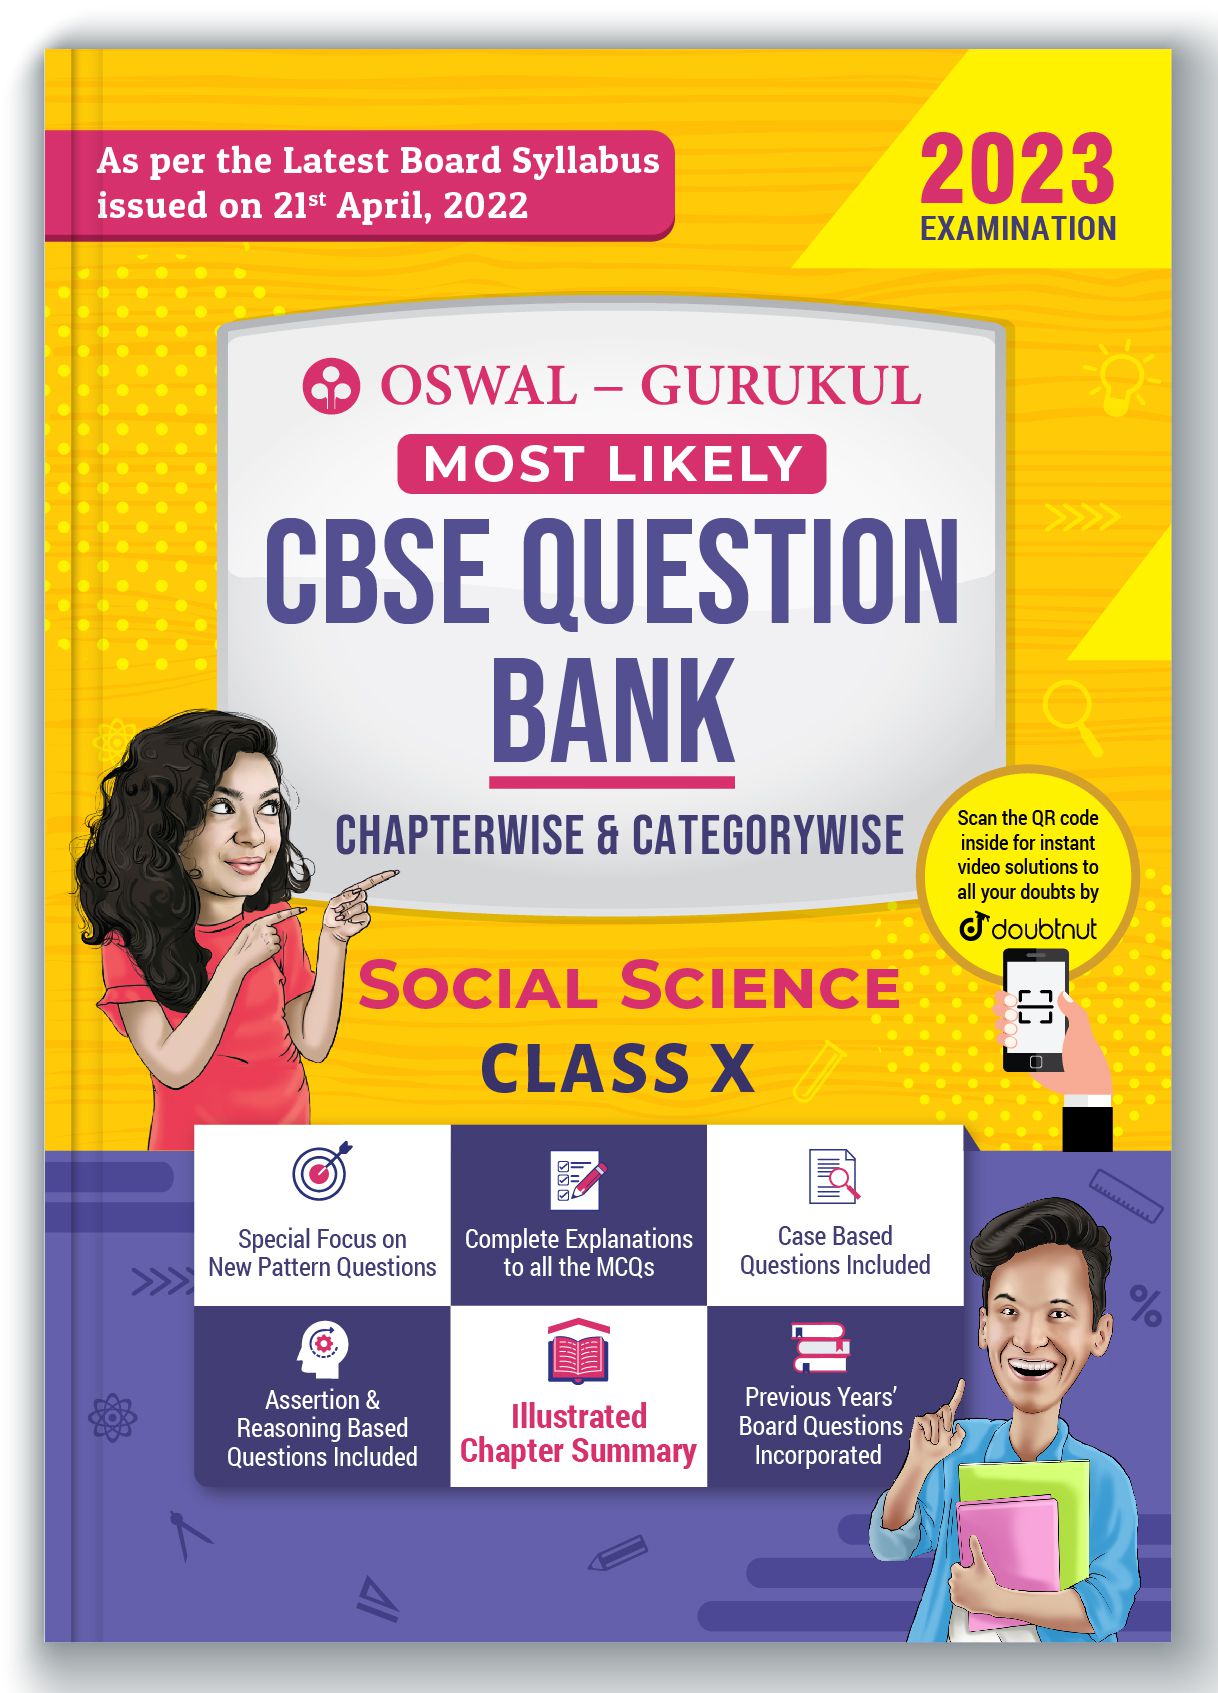     			Oswal - Gurukul Social Science Most Likely CBSE Question Bank for Class 10 Exam 2023 - Chapterwise & Categorywise, New Paper Pattern